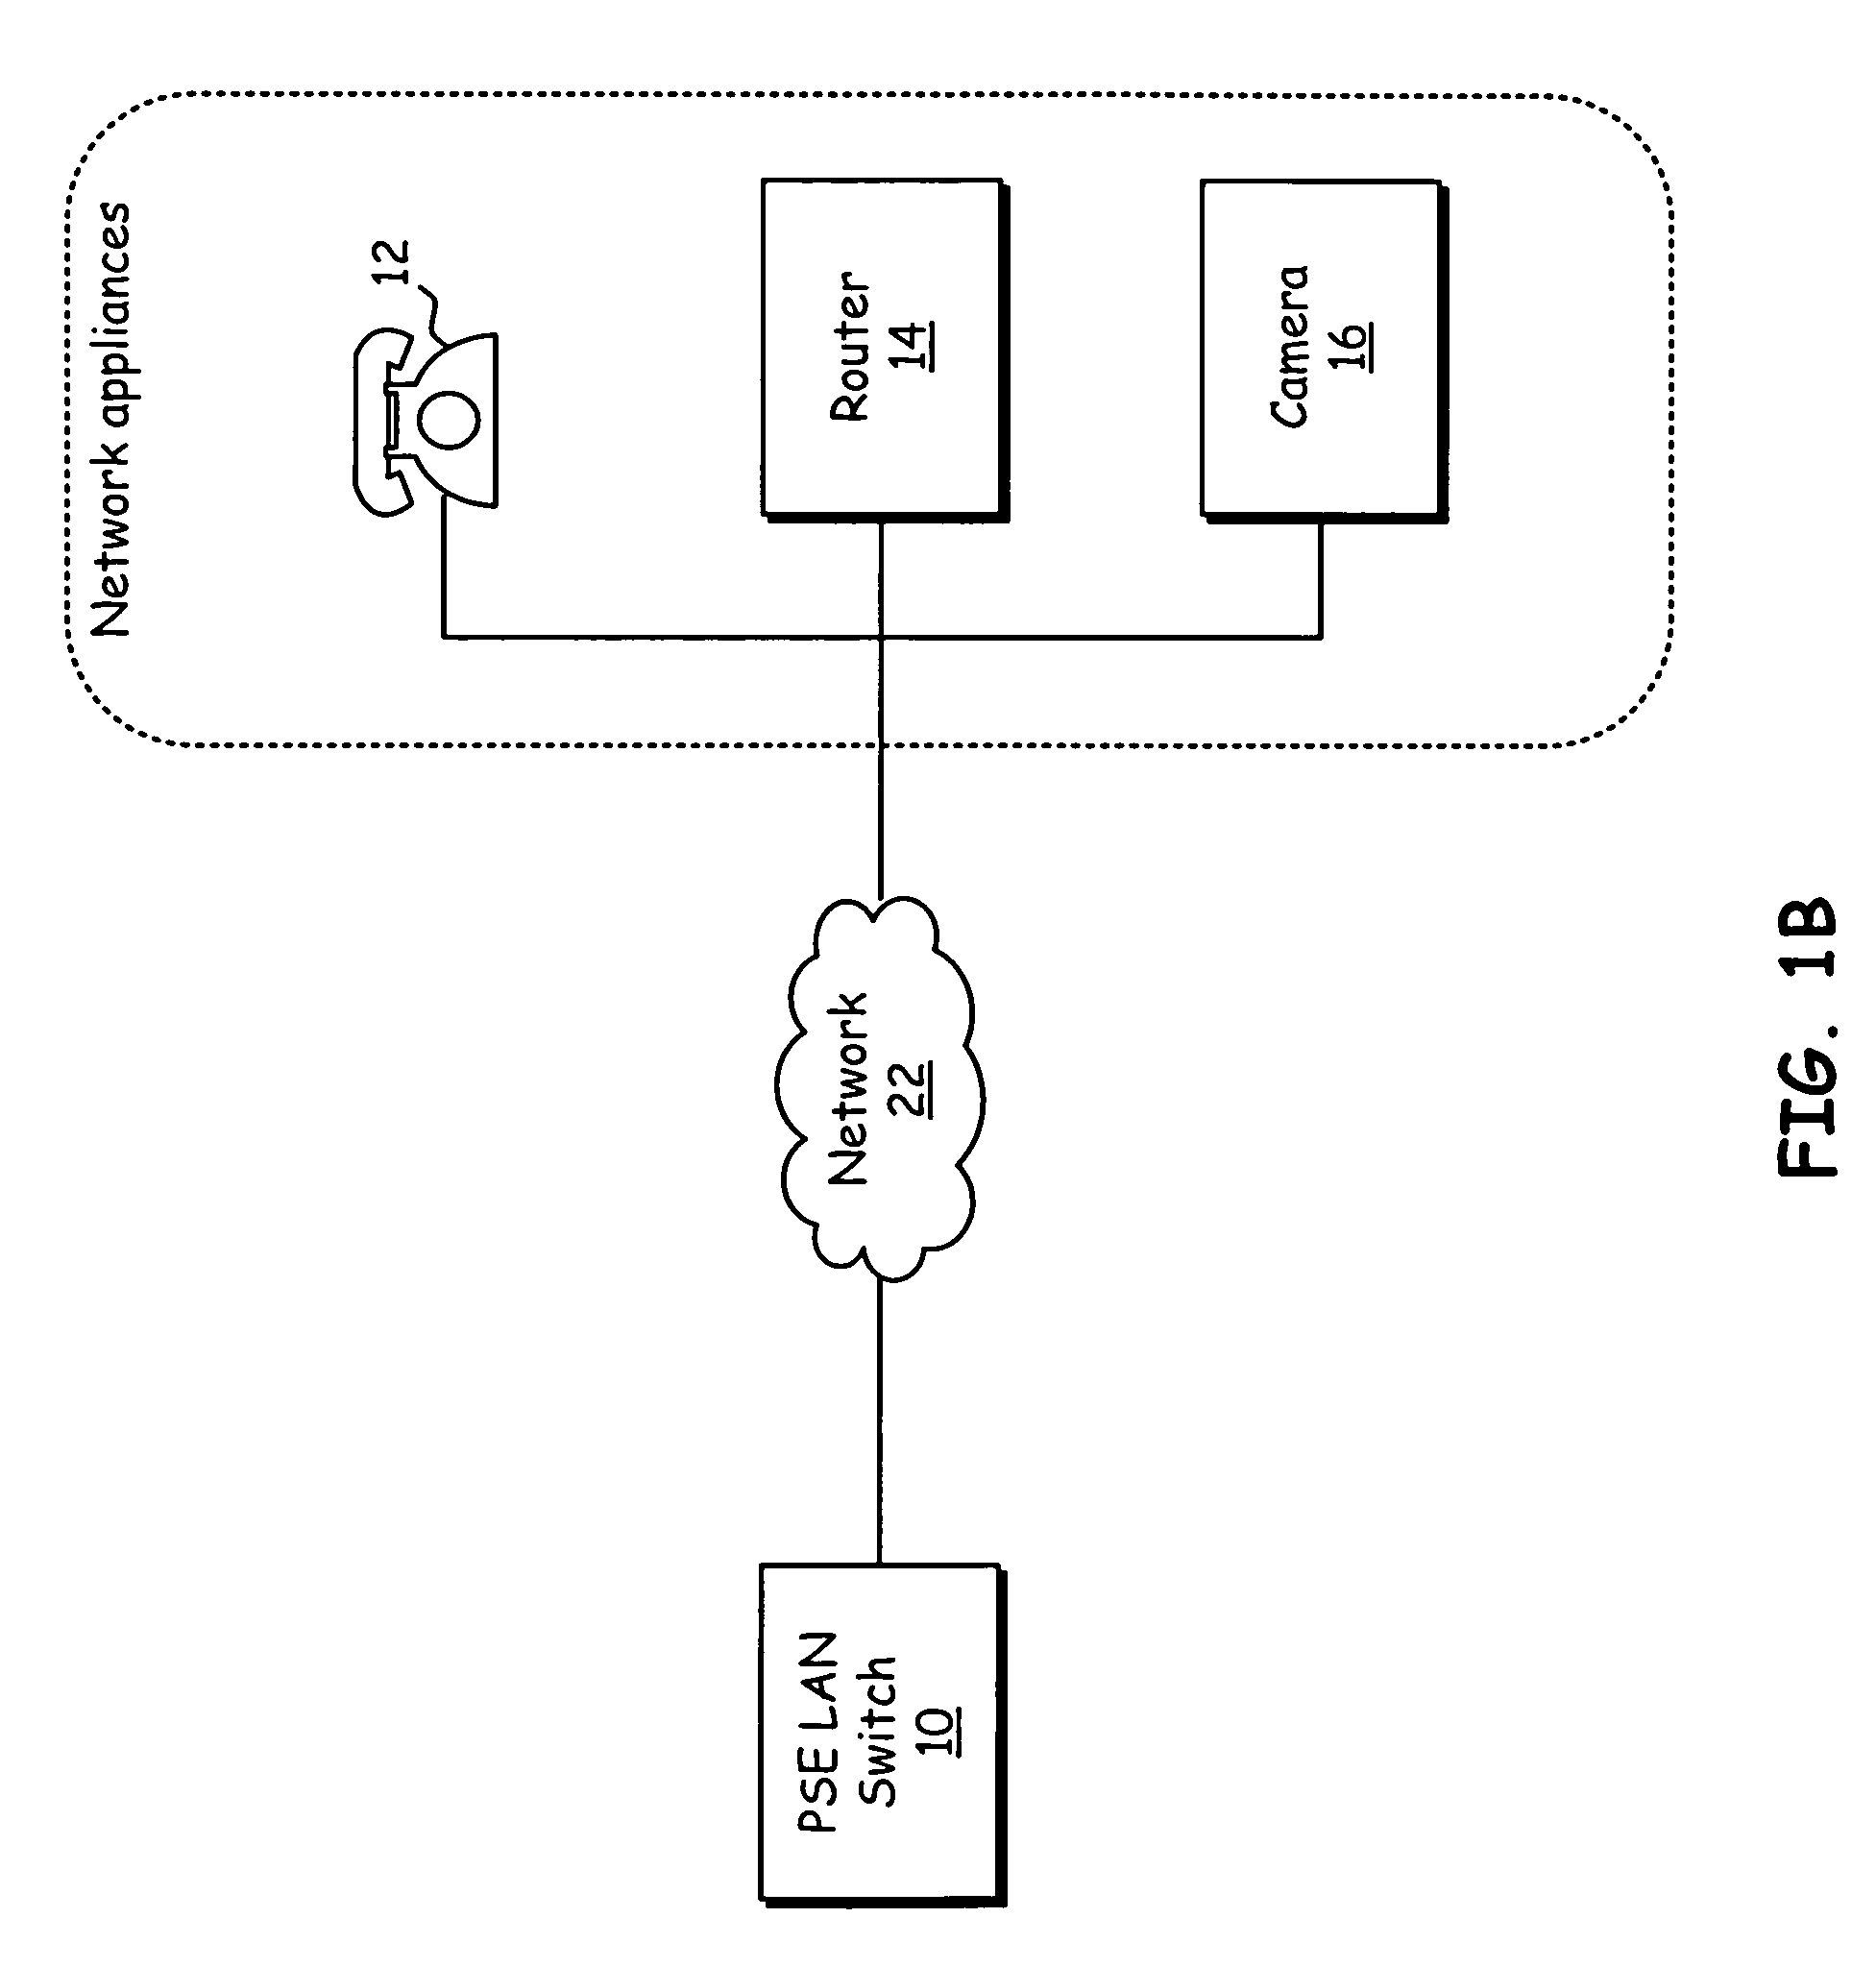 Systems and methods operable to allow loop powering of networked devices